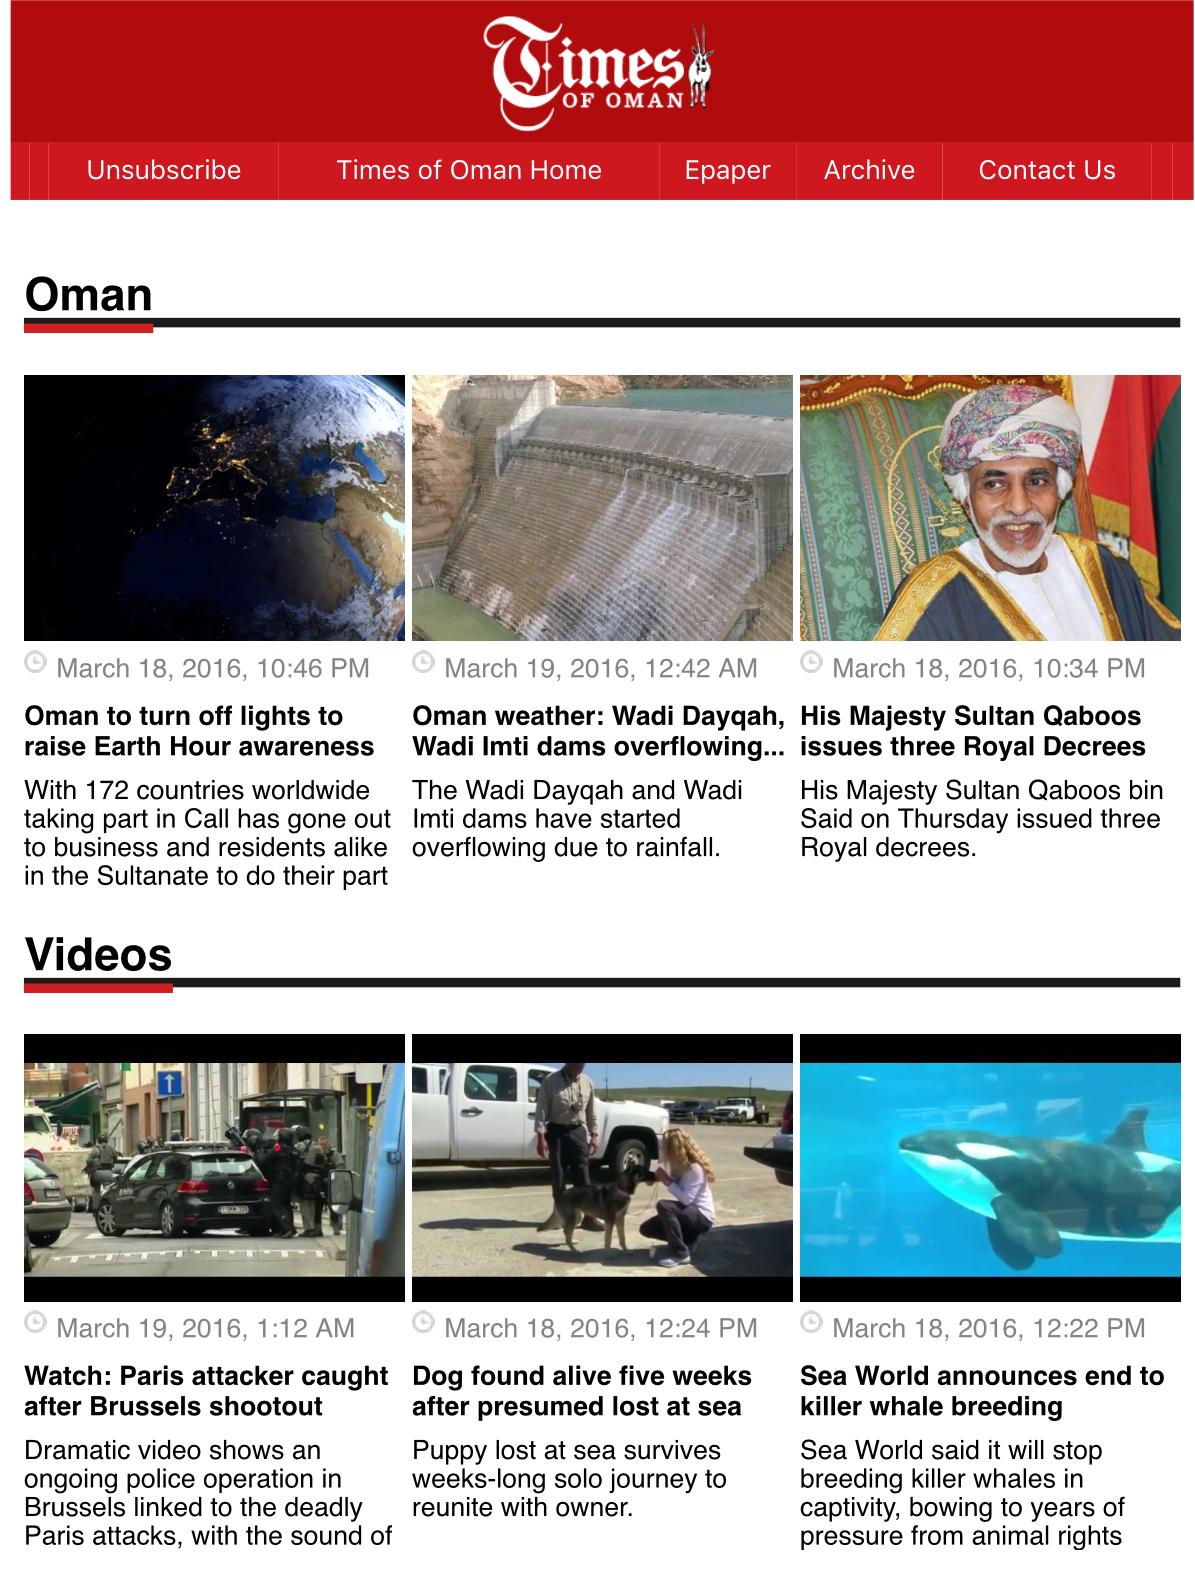 Times of Oman launches daily email newsletter